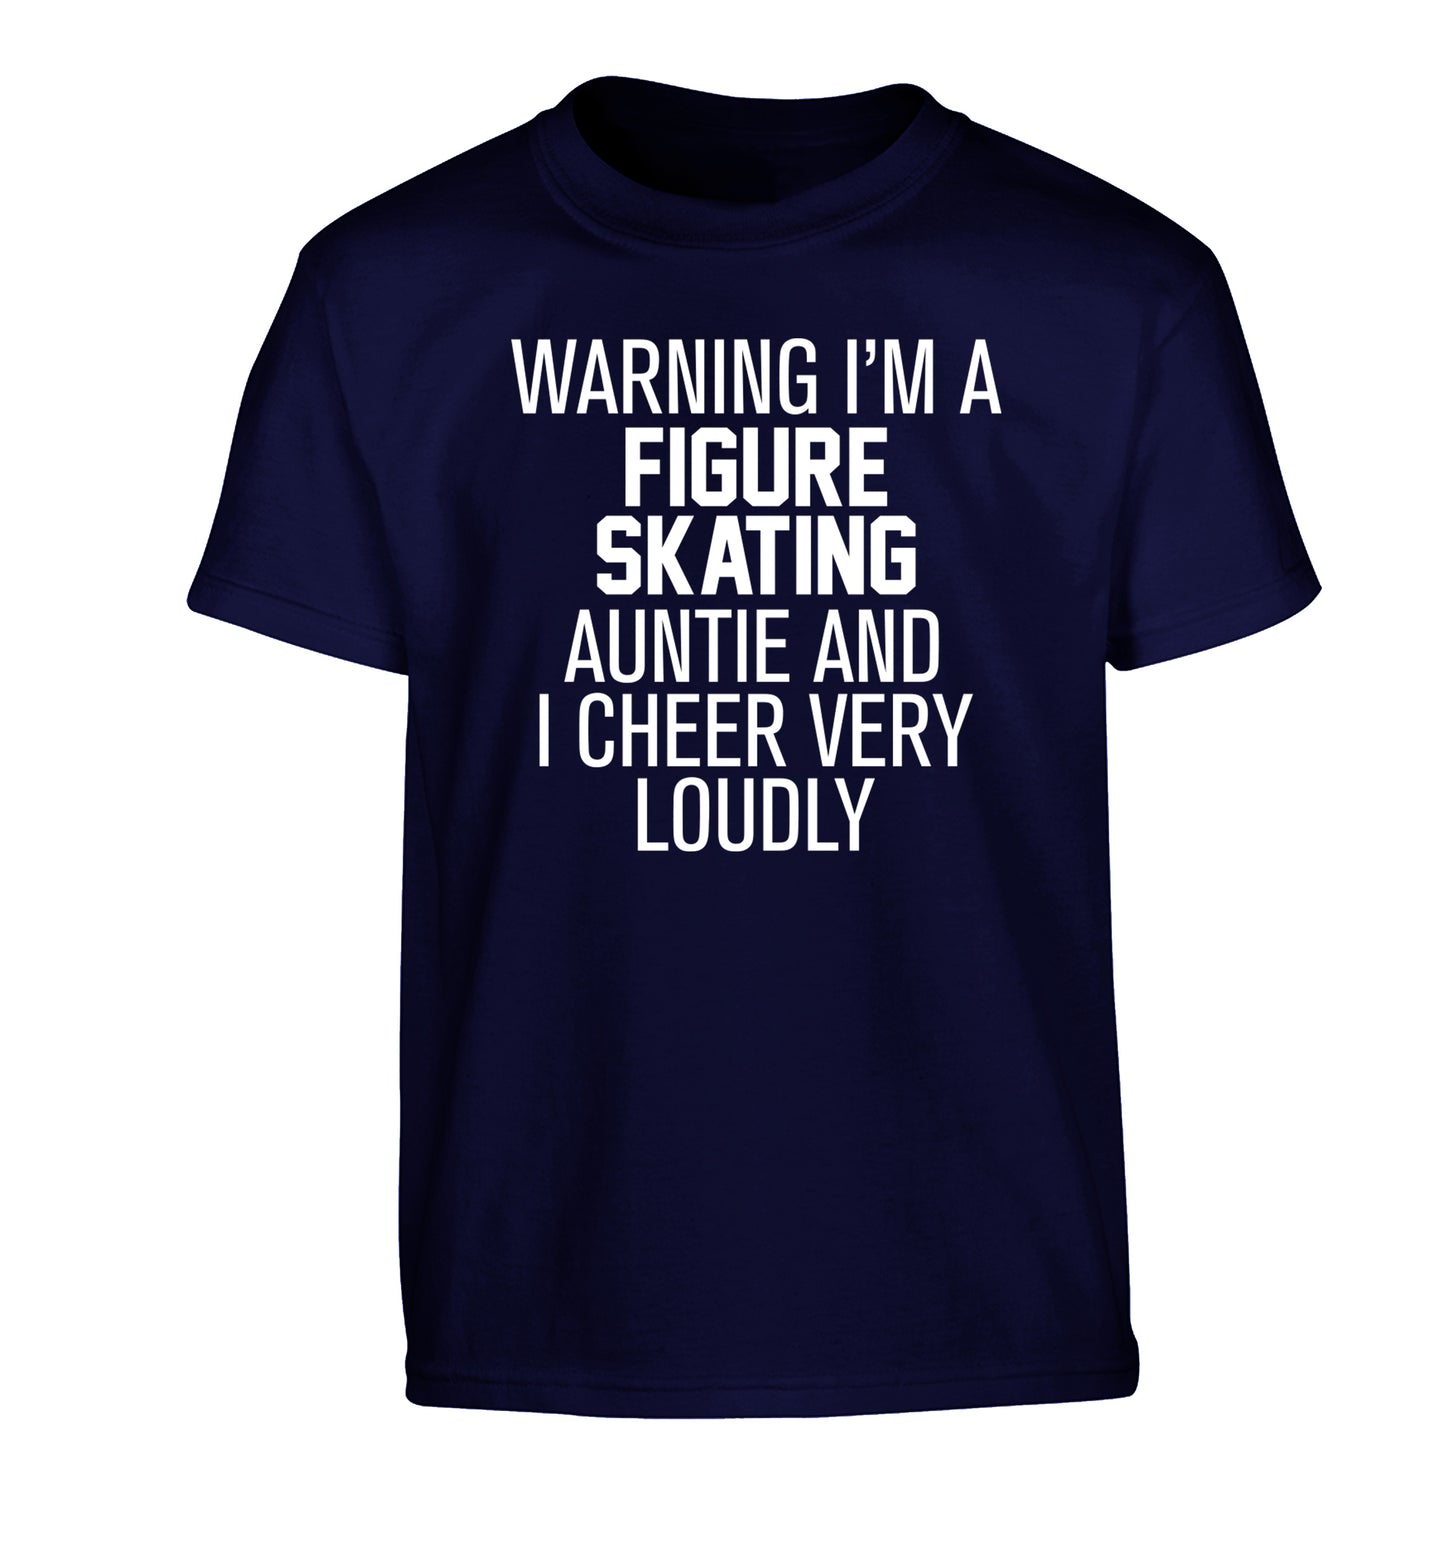 Warning I'm a figure skating auntie and I cheer very loudly Children's navy Tshirt 12-14 Years